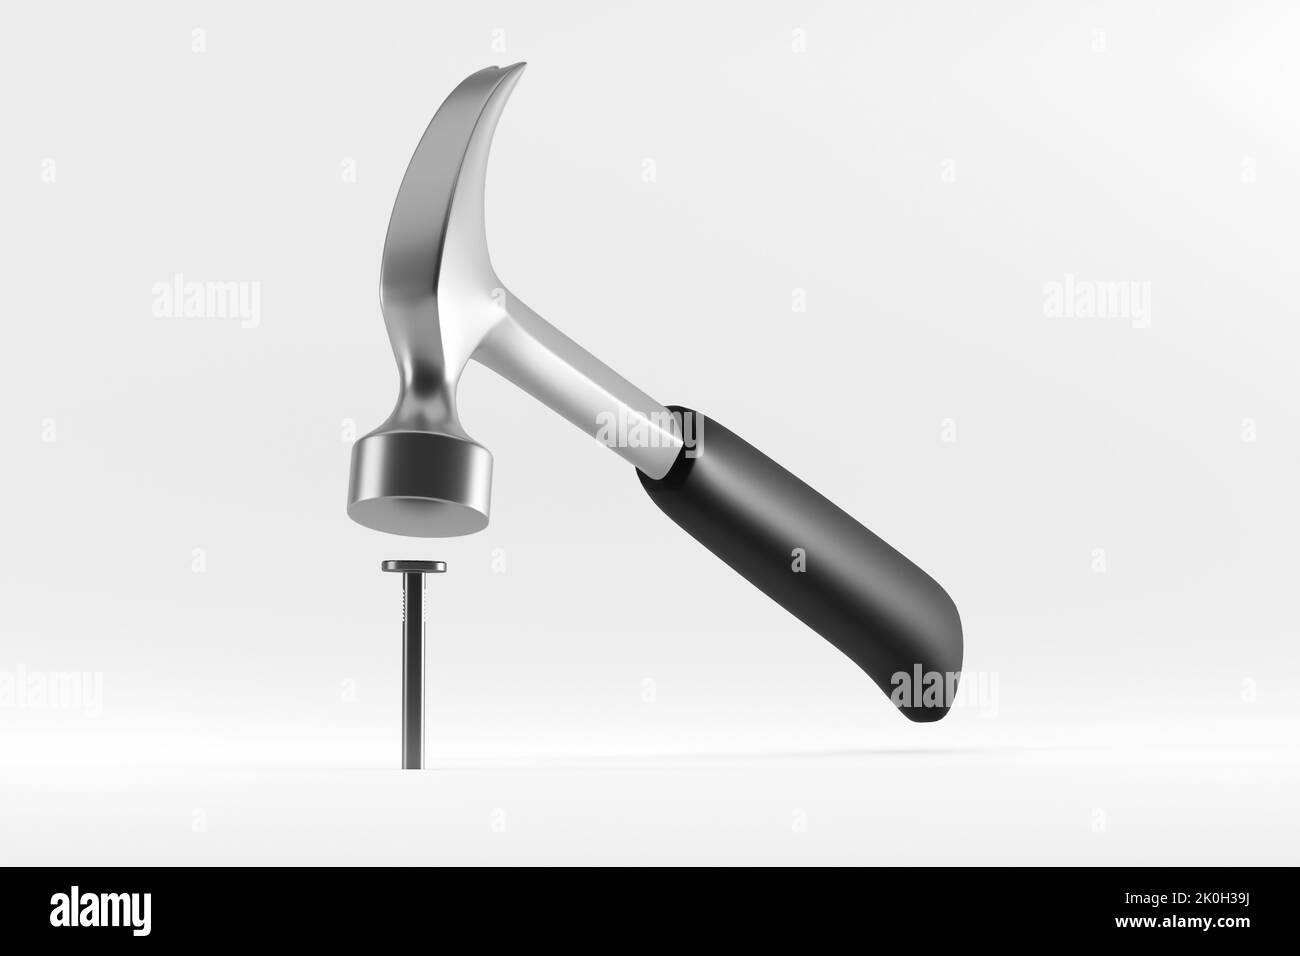 Claw hammer with black plastic handle hitting a nail on white background. 3D rendering. Stock Photo